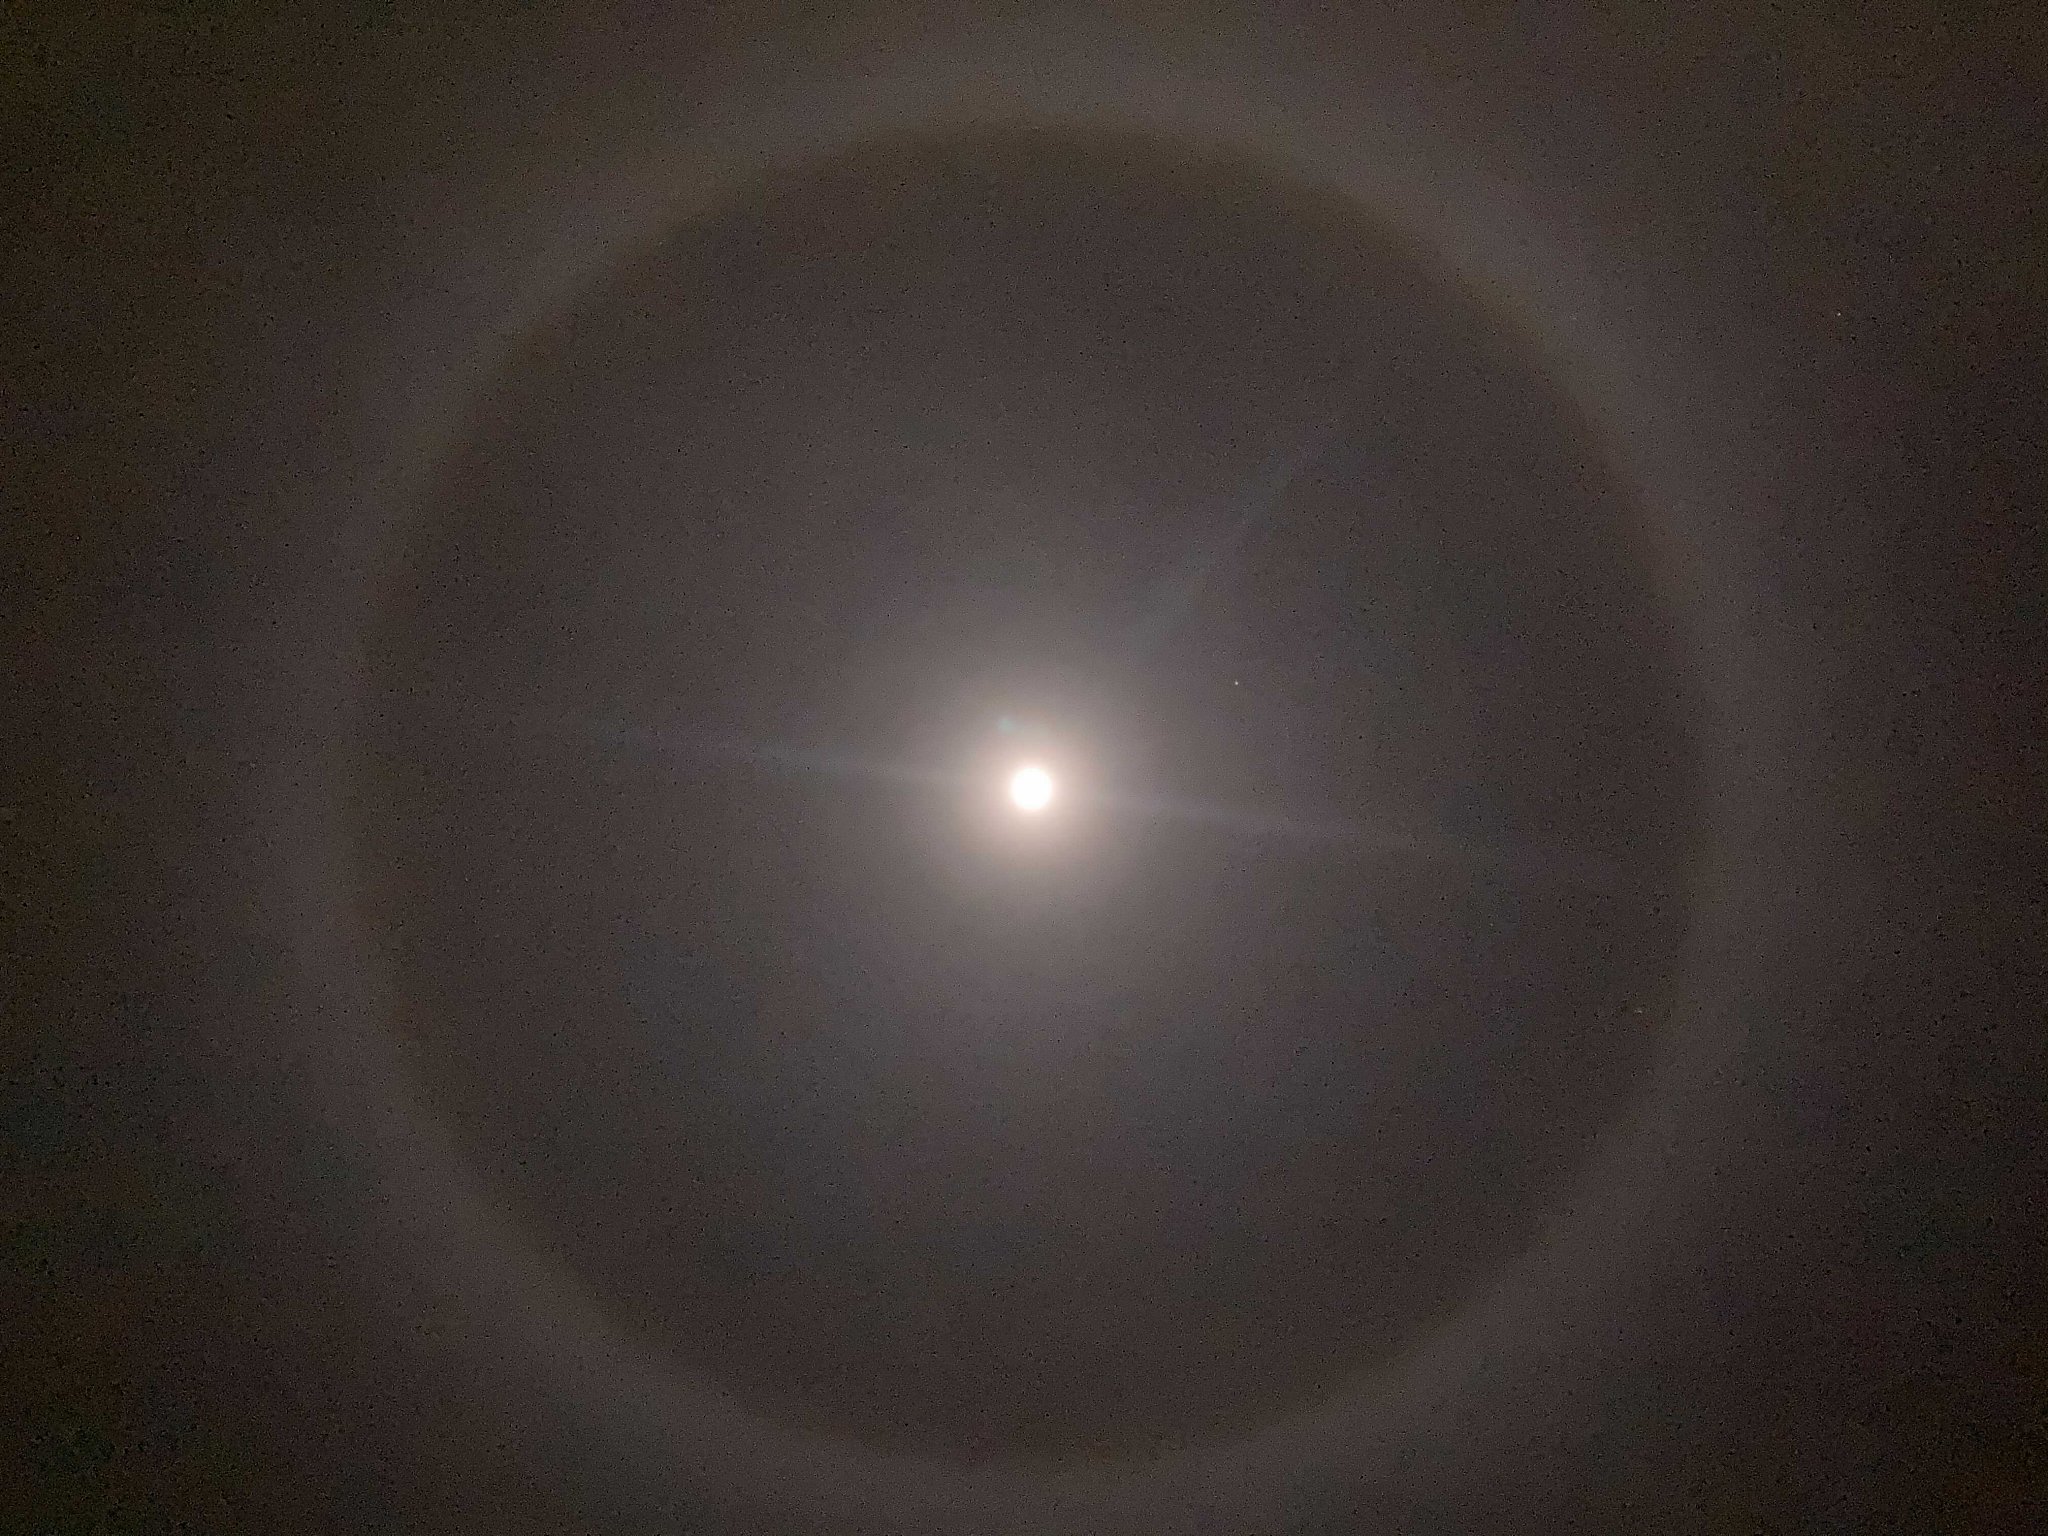 Why the moon above the Bay Area had a halo on Saturday night